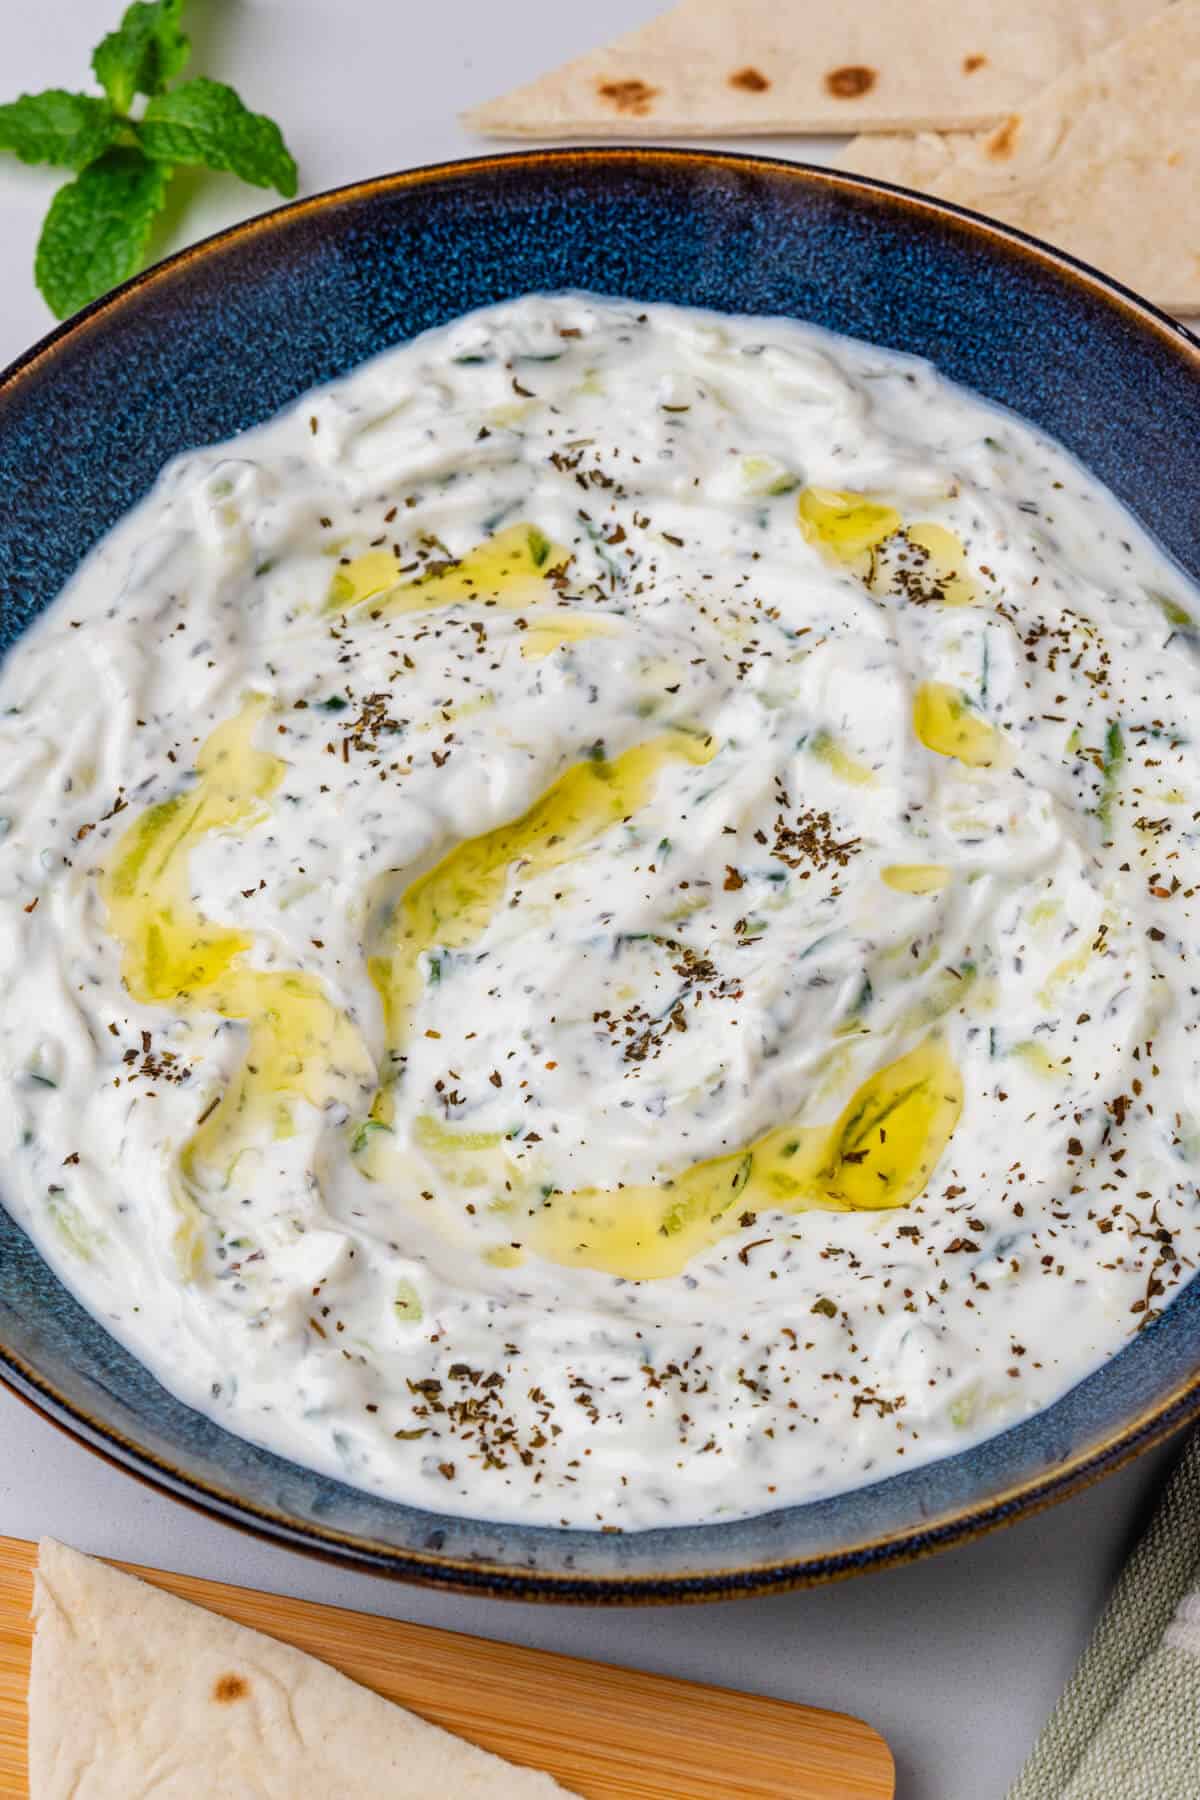 Cacik in a bowl with fresh mint and pita bread